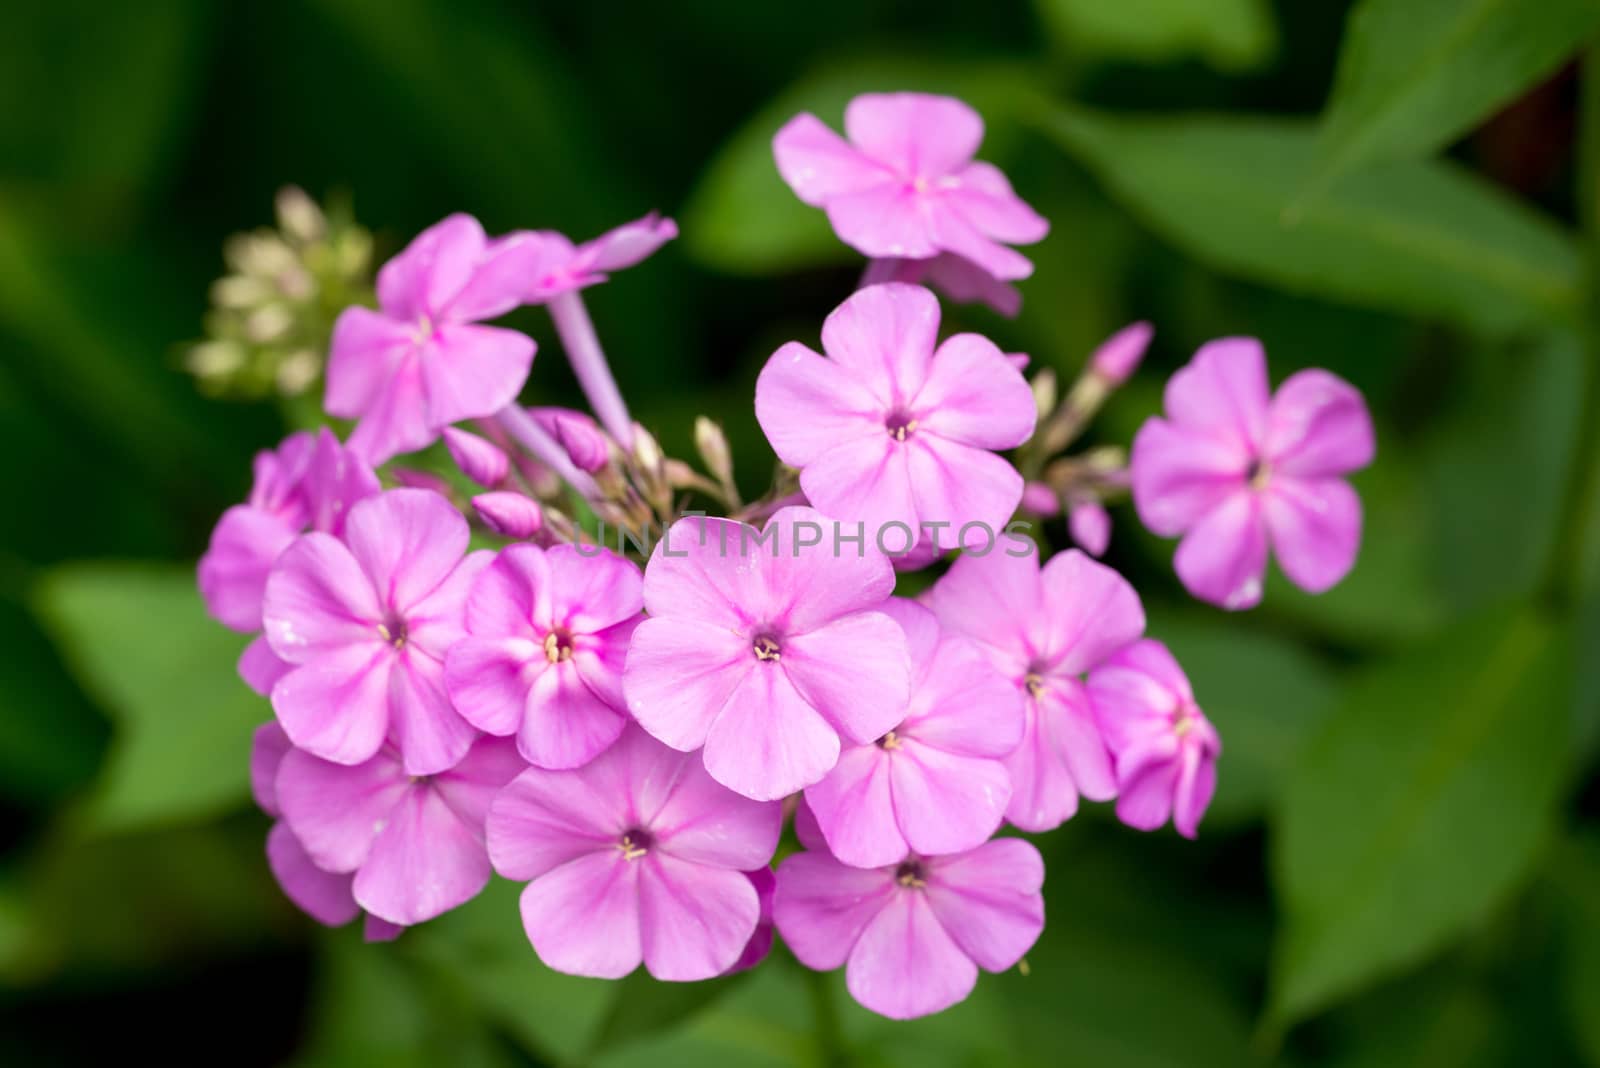 Close-up portrait of a blossoming phlox - summer flower seen in germany